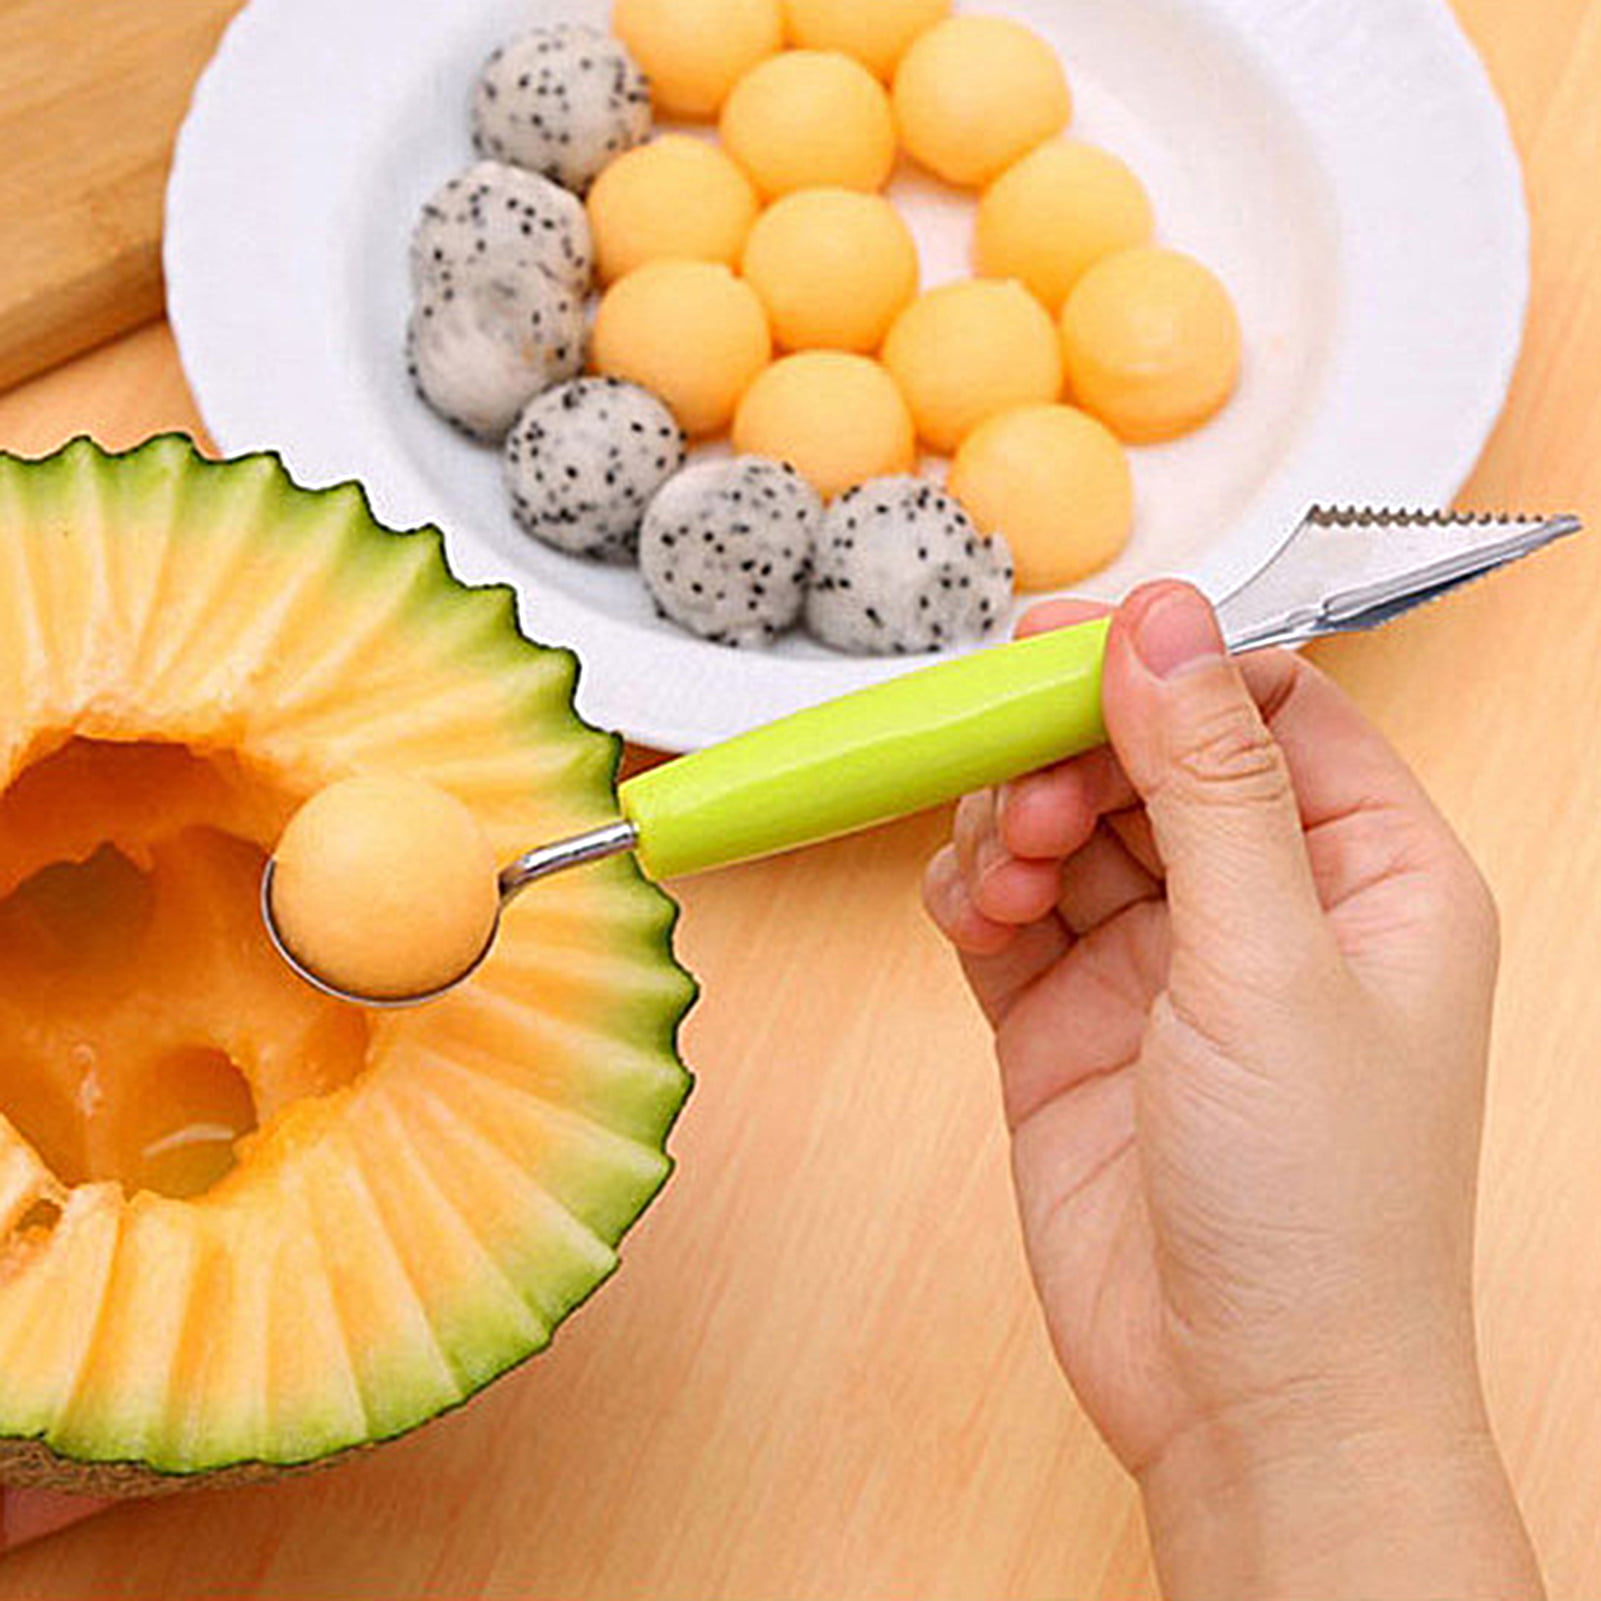 Dropship Professional 4 In 1 Stainless Steel Watermelon Cutter Fruit  Carving Tools Set,Fruit Scooper Seed Remover Watermelon Knife For Dig Pulp  Separator Fruit Slicer, Melon Baller Scoop Set to Sell Online at